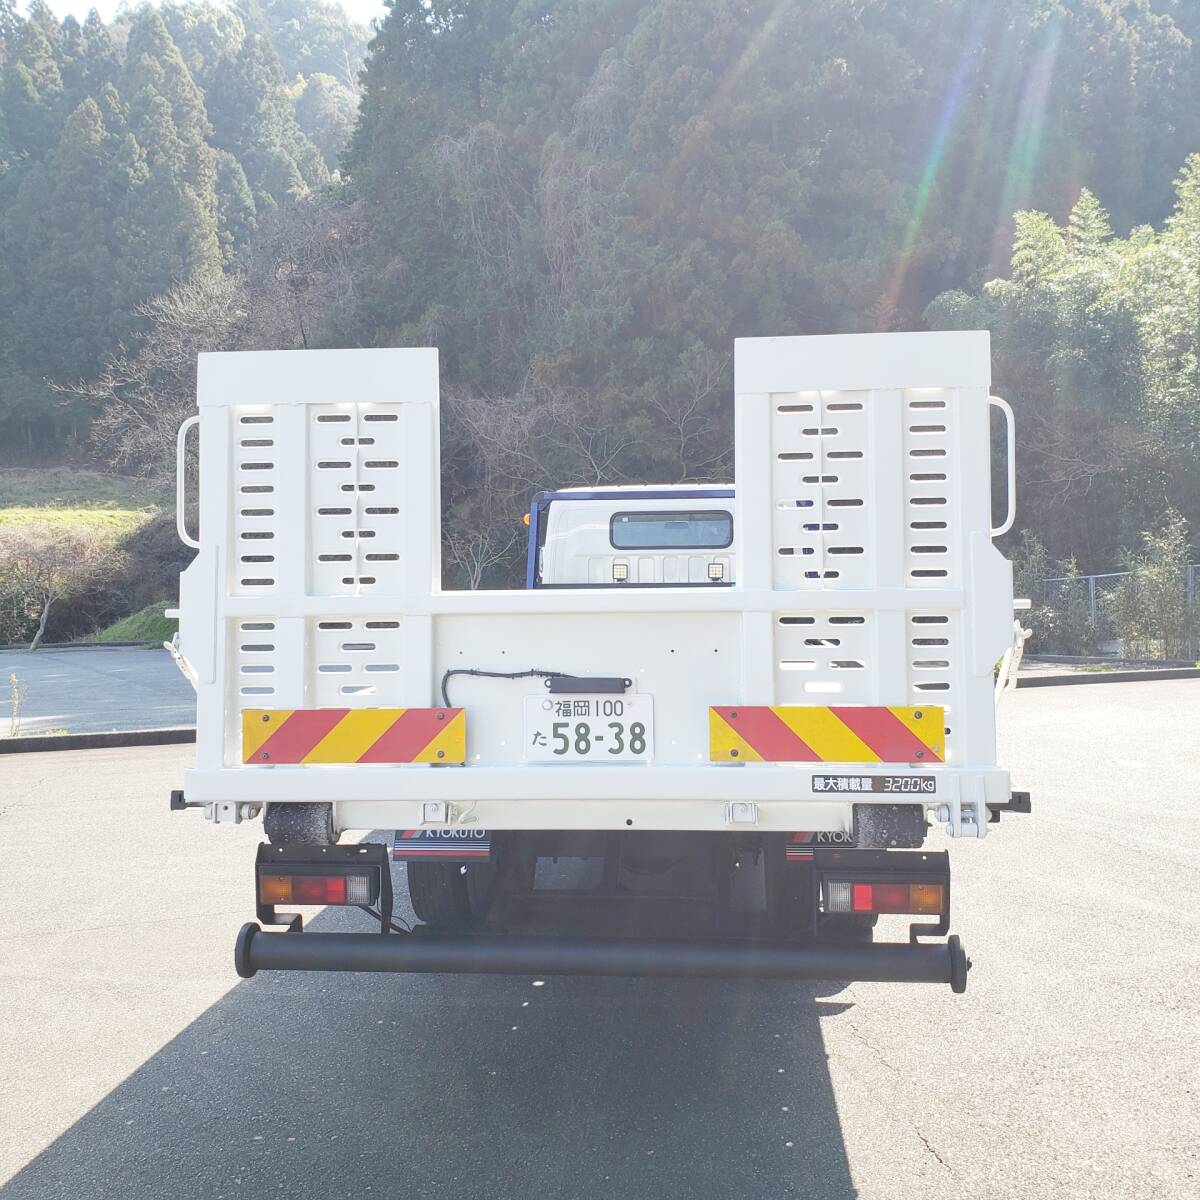  selling up radio-controller loading car Kyokuto full flat loading 3200kg Mitsubishi Canter custom . included .. equipment 5MT 7.5t under . medium sized license vehicle inspection "shaken" . peace 7 year 3 month animation have 